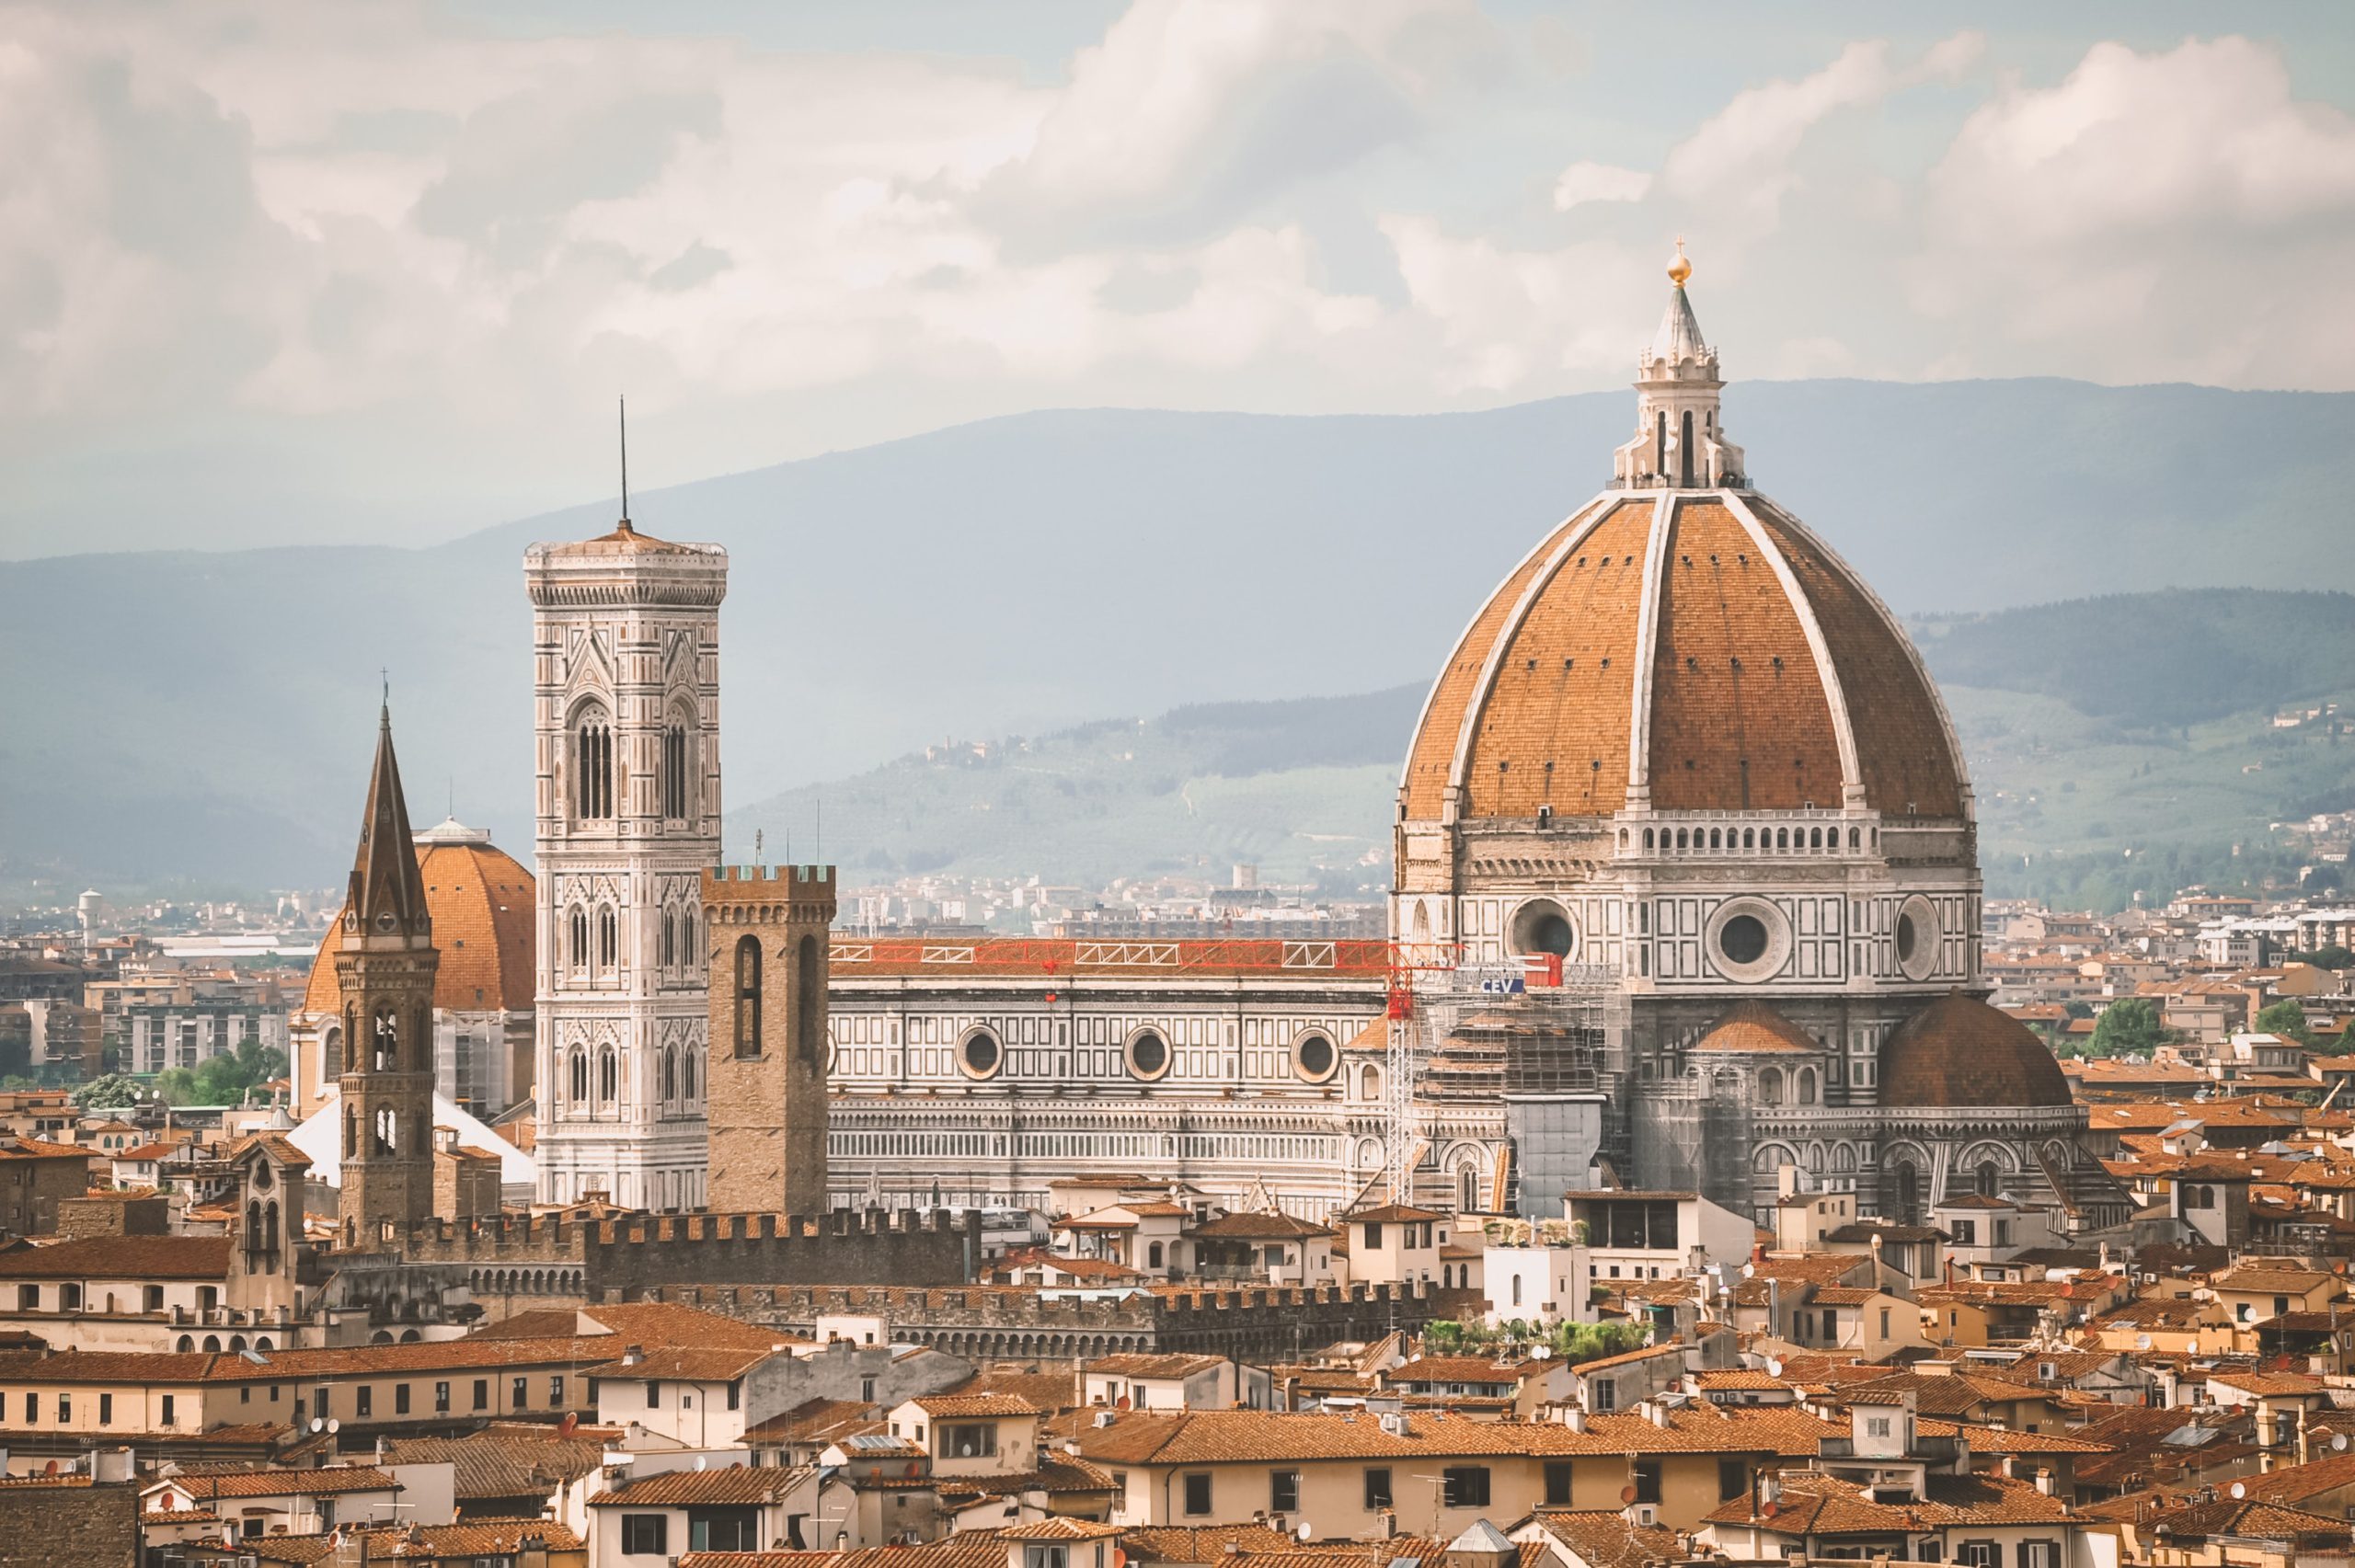 Florance, Italy - 15 Most Expensive Places to Vacation